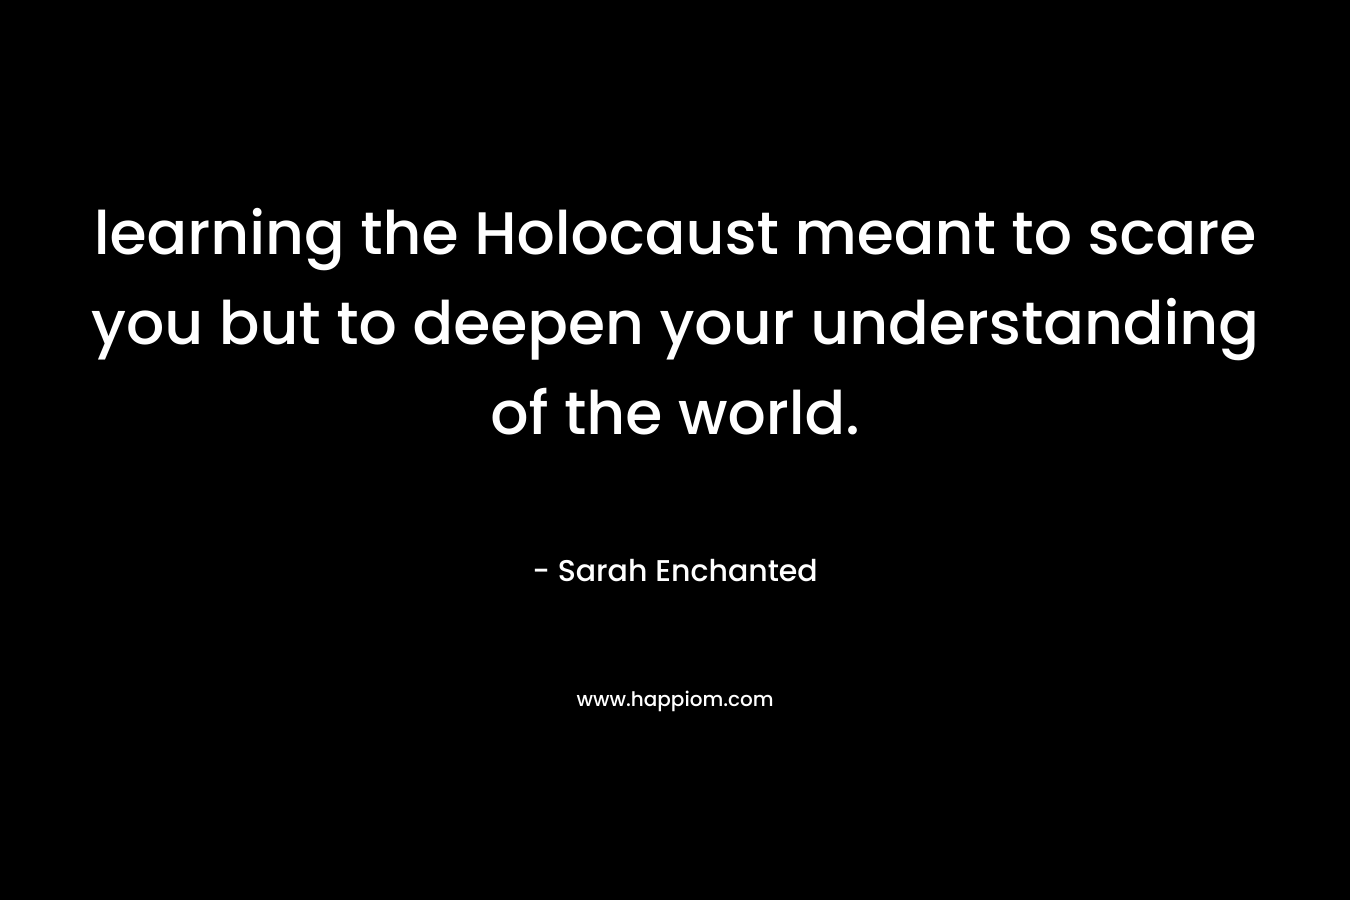 learning the Holocaust meant to scare you but to deepen your understanding of the world. – Sarah Enchanted